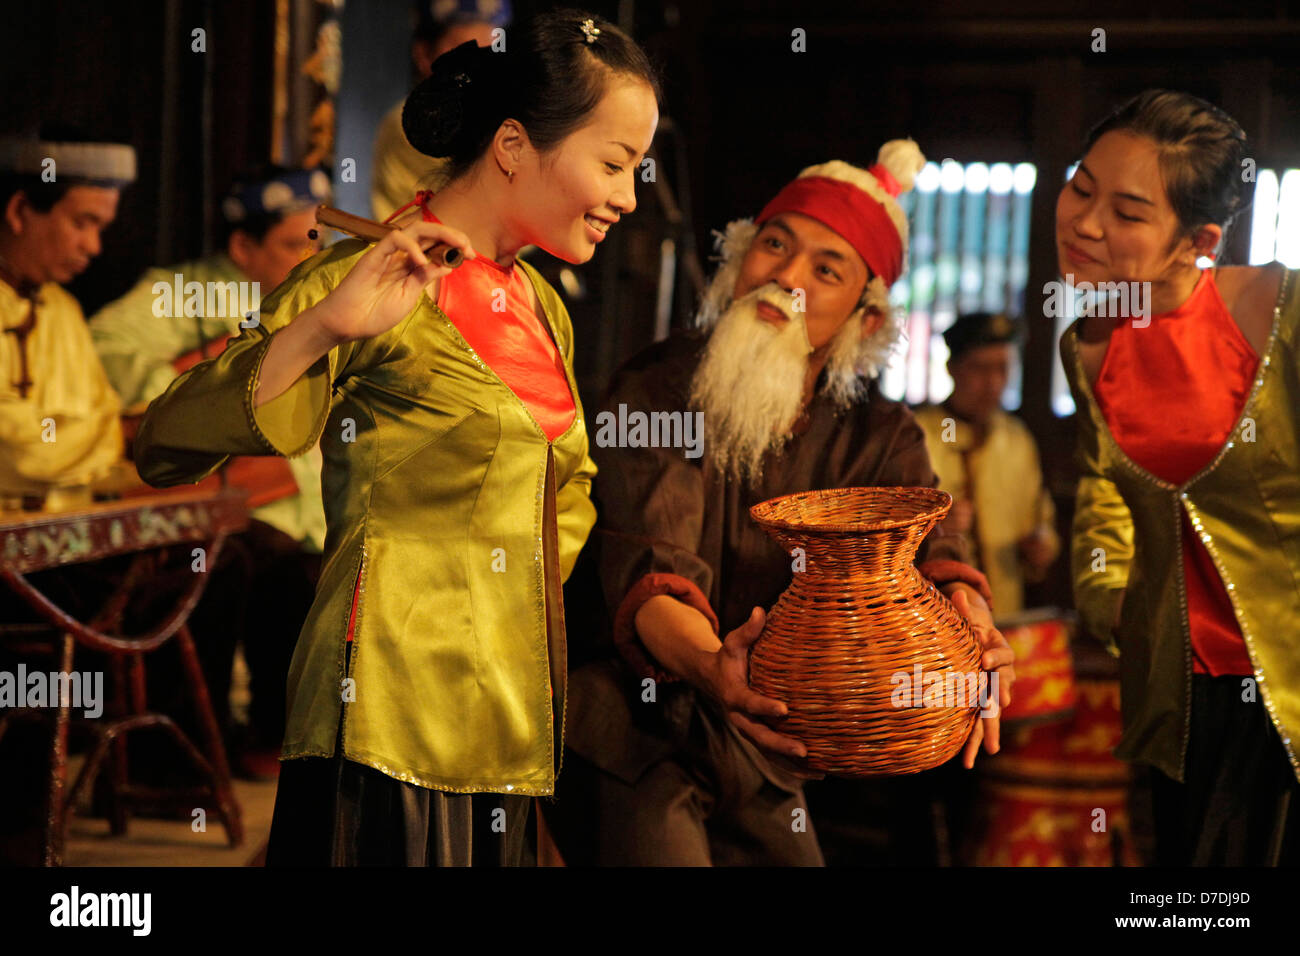 folk songs and folk dances with traditional costumes and instruments in Hoi An, Vietnam Stock Photo